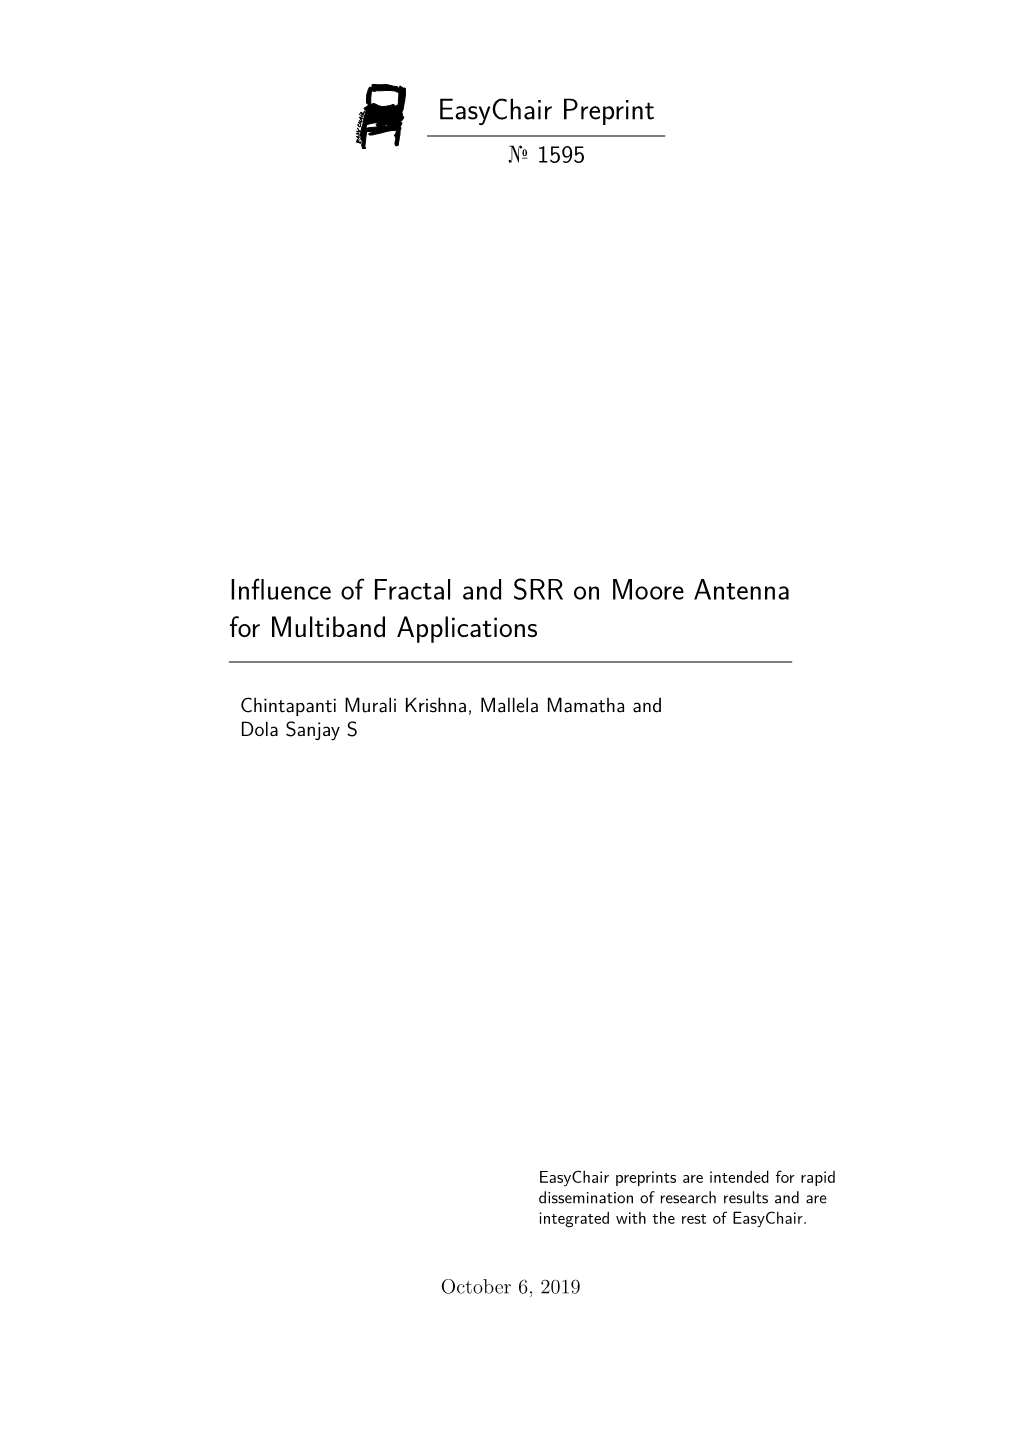 Influence of Fractal and SRR on Moore Antenna for Multiband Applications